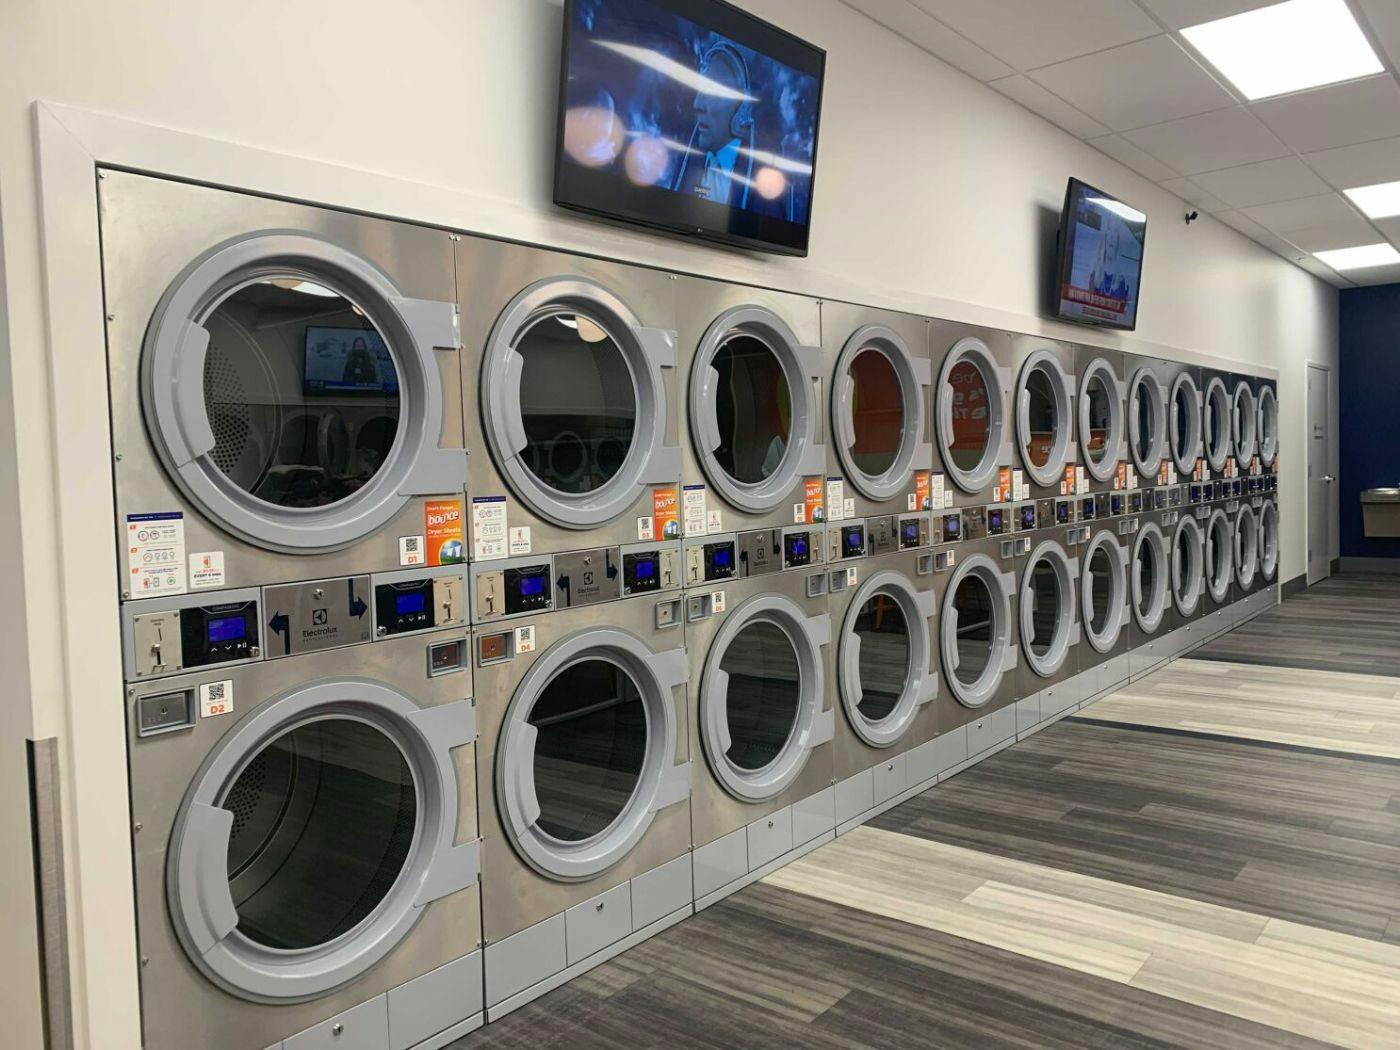 featured image - “These Are Not Laundromat Tokens” — The End of The Crypto Wild West